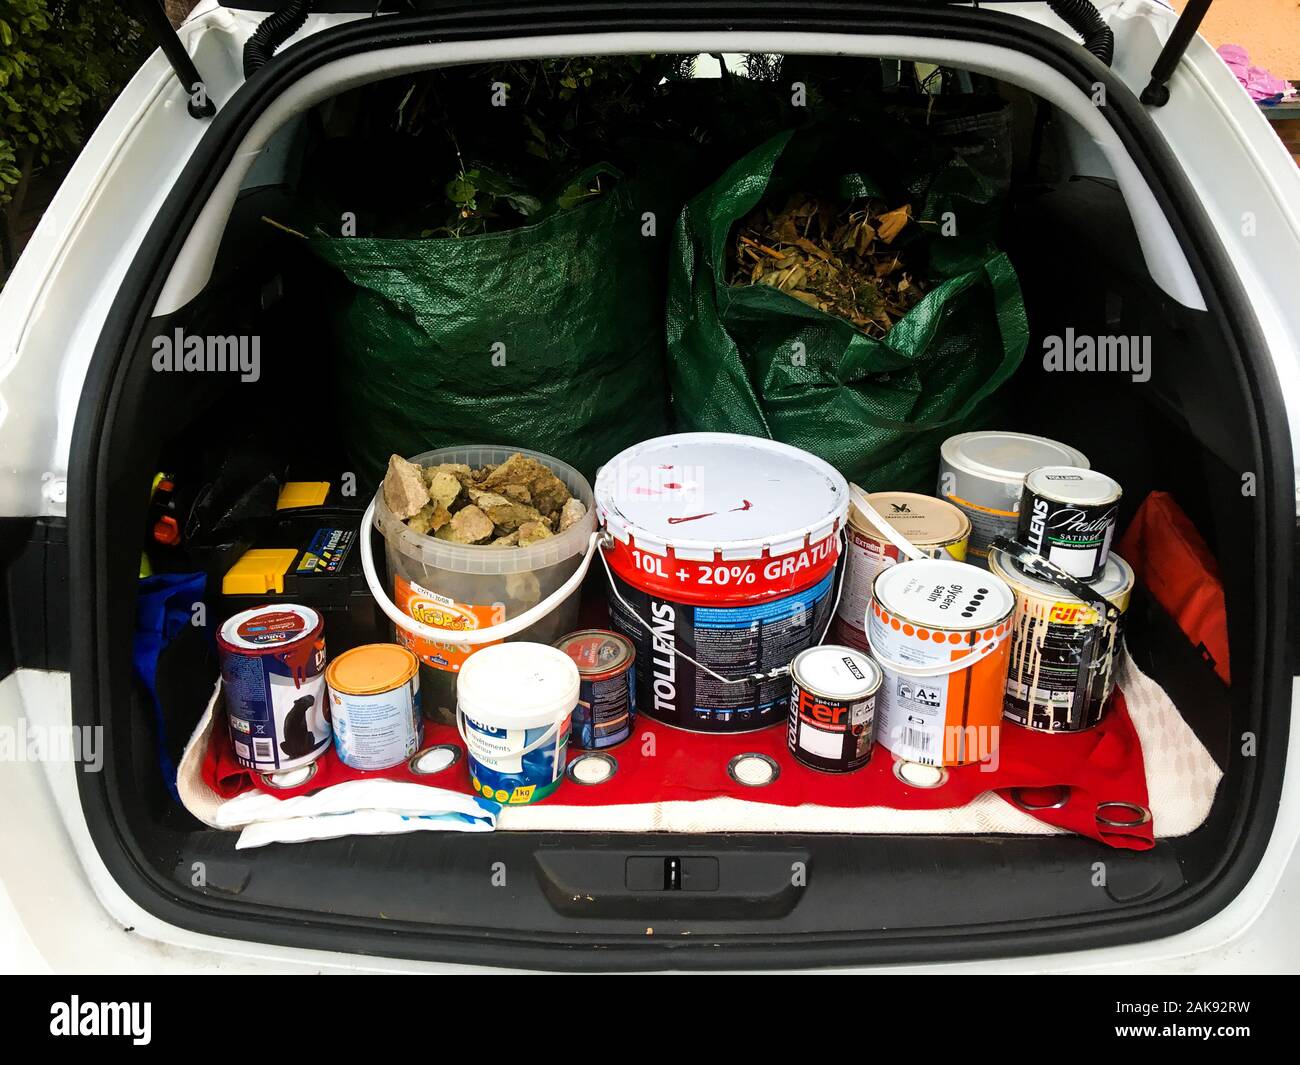 Paint buckets to recycle, stocked in a car trunk, Lyon, France Stock Photo